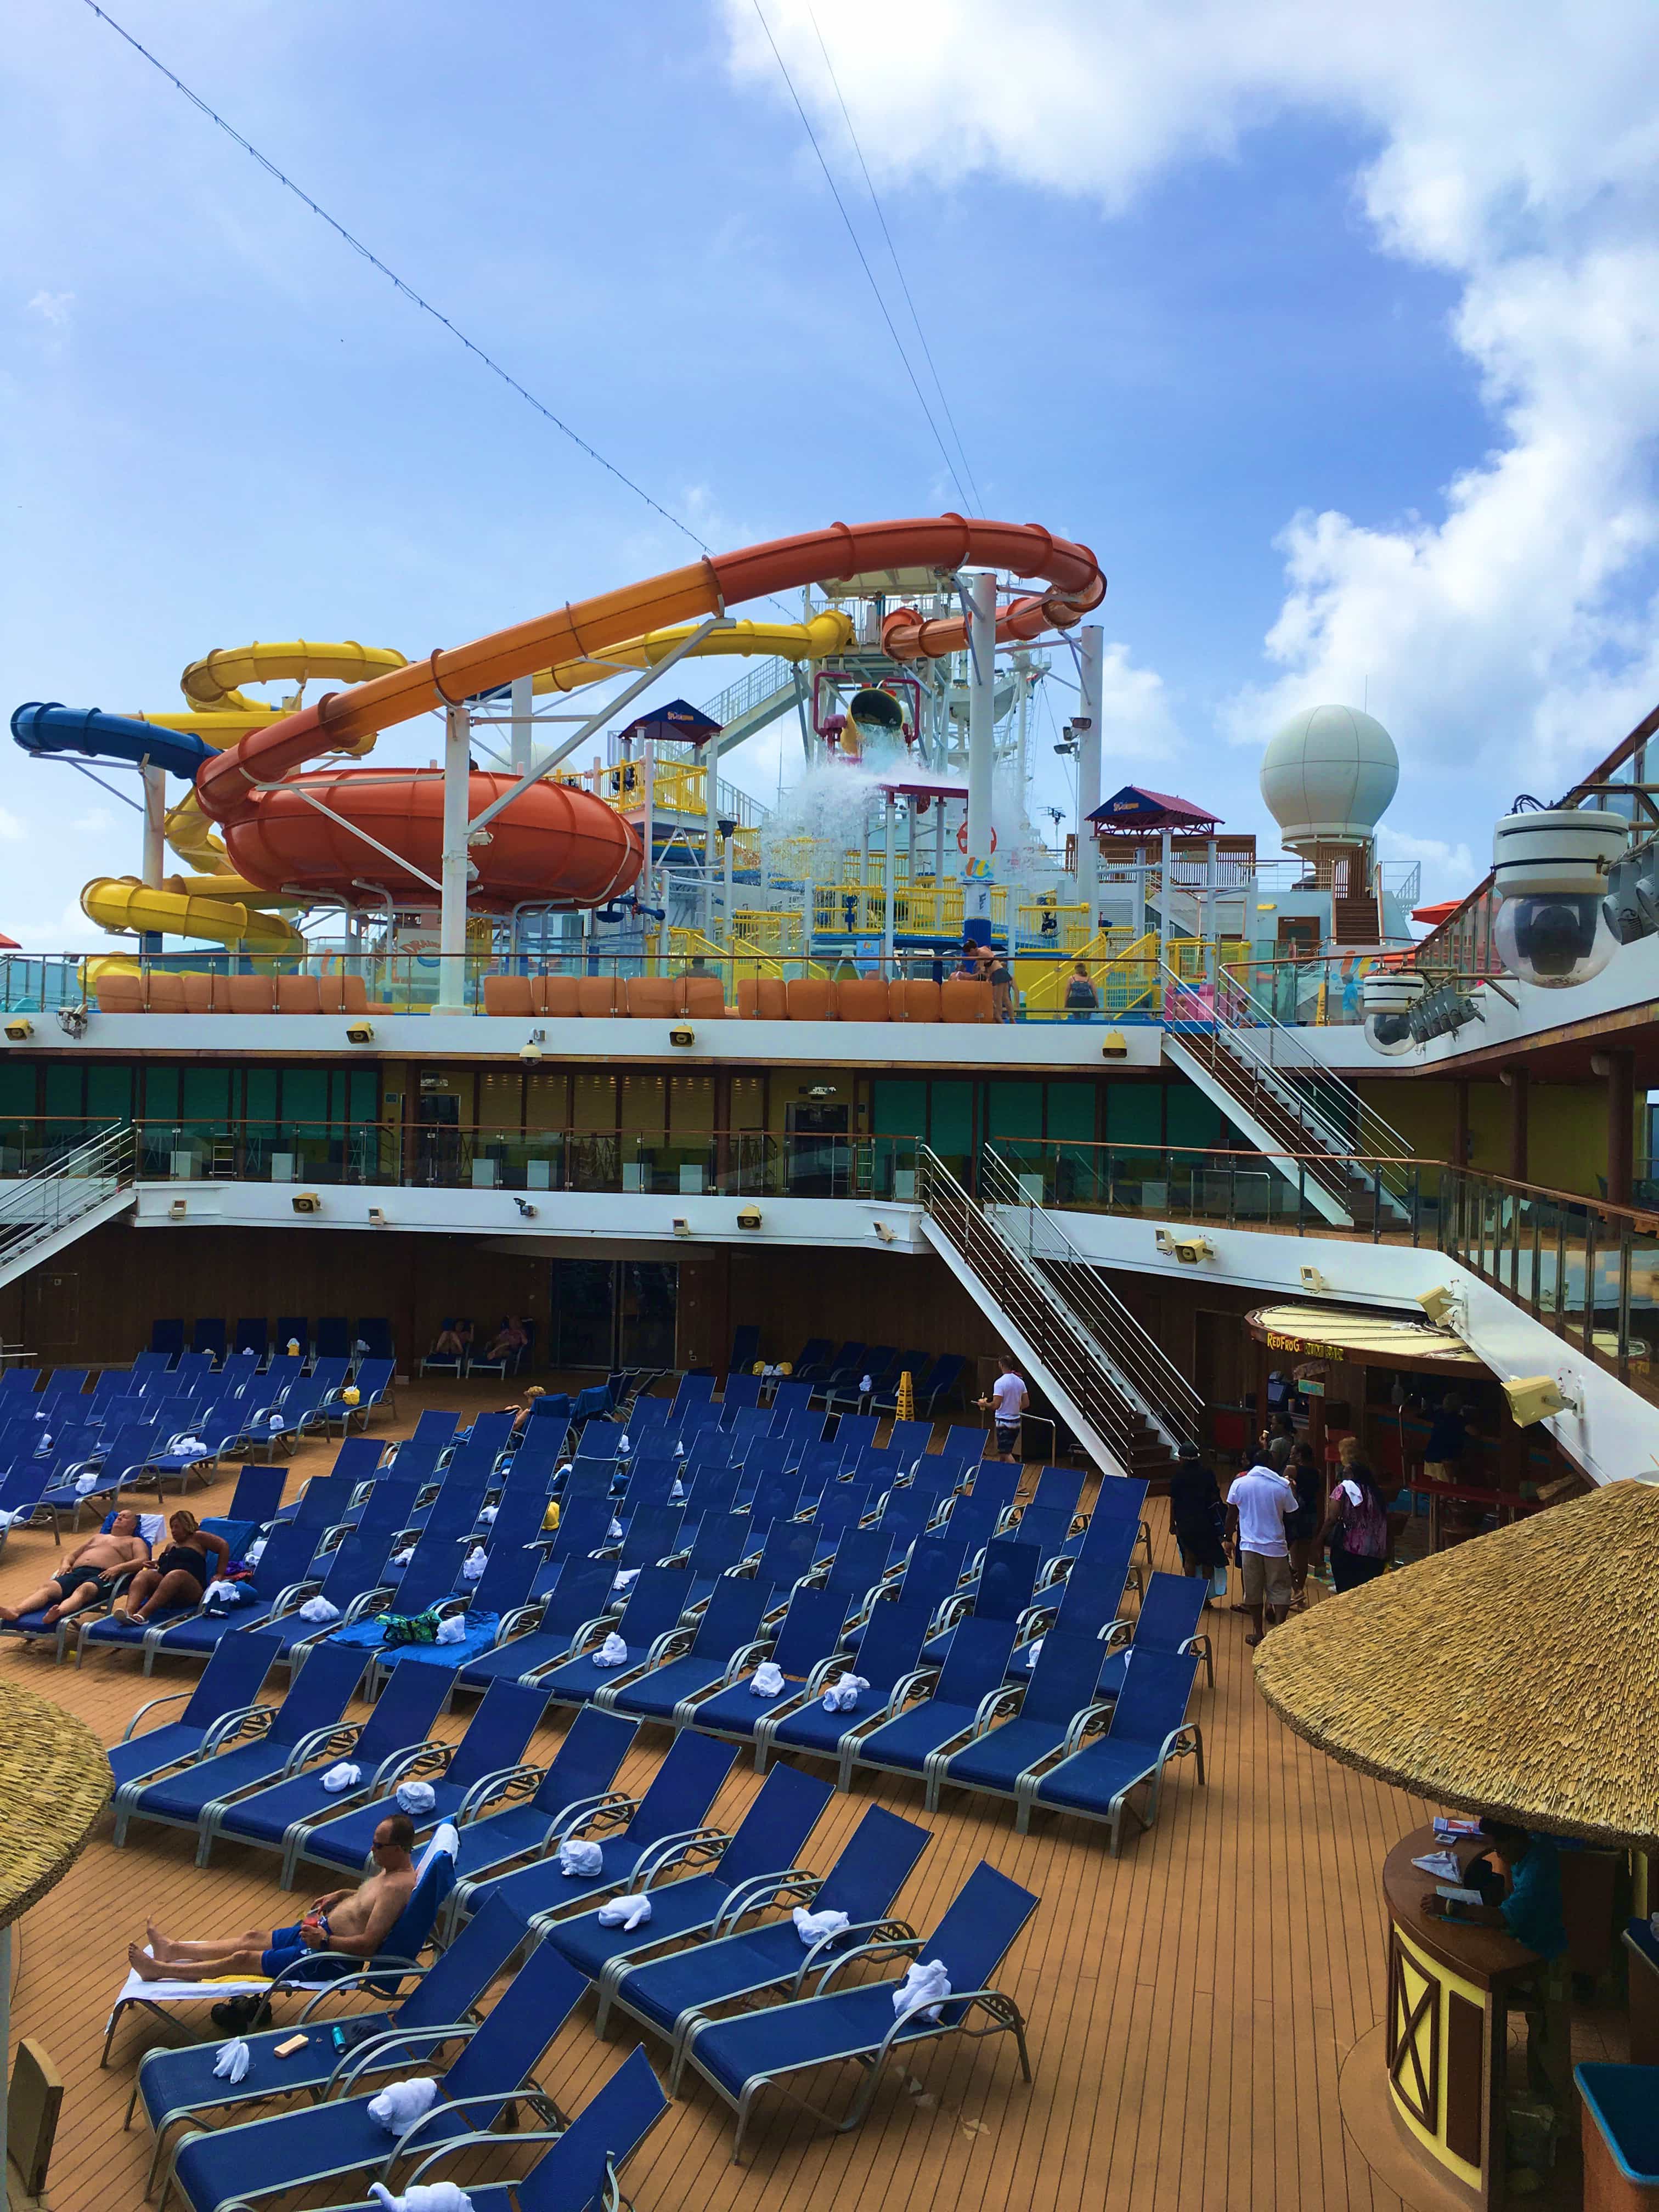 9 Reasons Cruising the Carnival Magic Good for Adults - Fun not just for kids - love the waterslide!